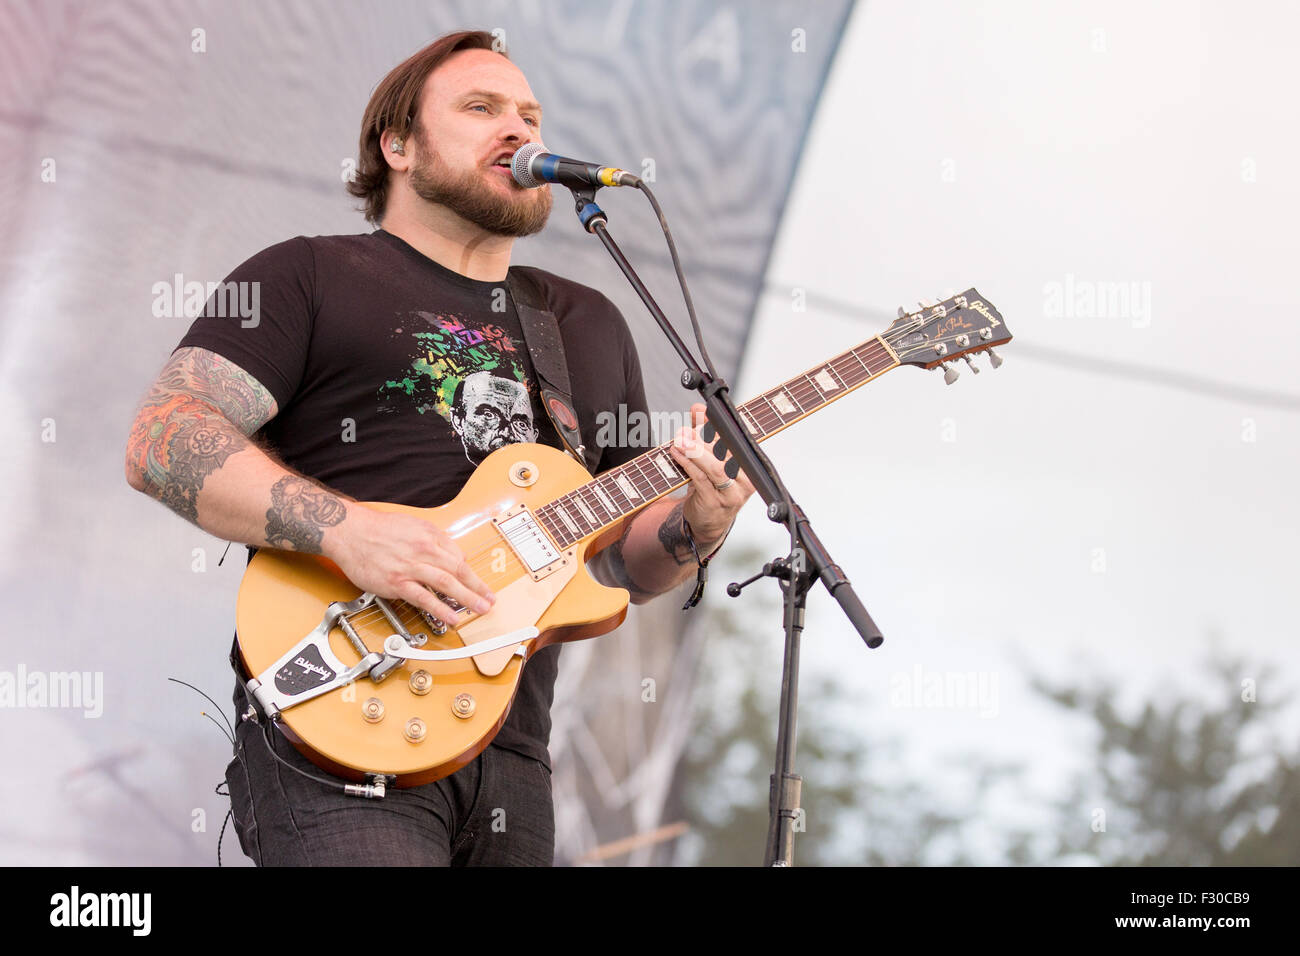 Chicago, Illinois, USA. 11th Sep, 2015. Guitarist TRAVIS STEVER of Coheed and Cambria performs live during Riot Fest at Douglas Park in Chicago, Illinois © Daniel DeSlover/ZUMA Wire/Alamy Live News Stock Photo